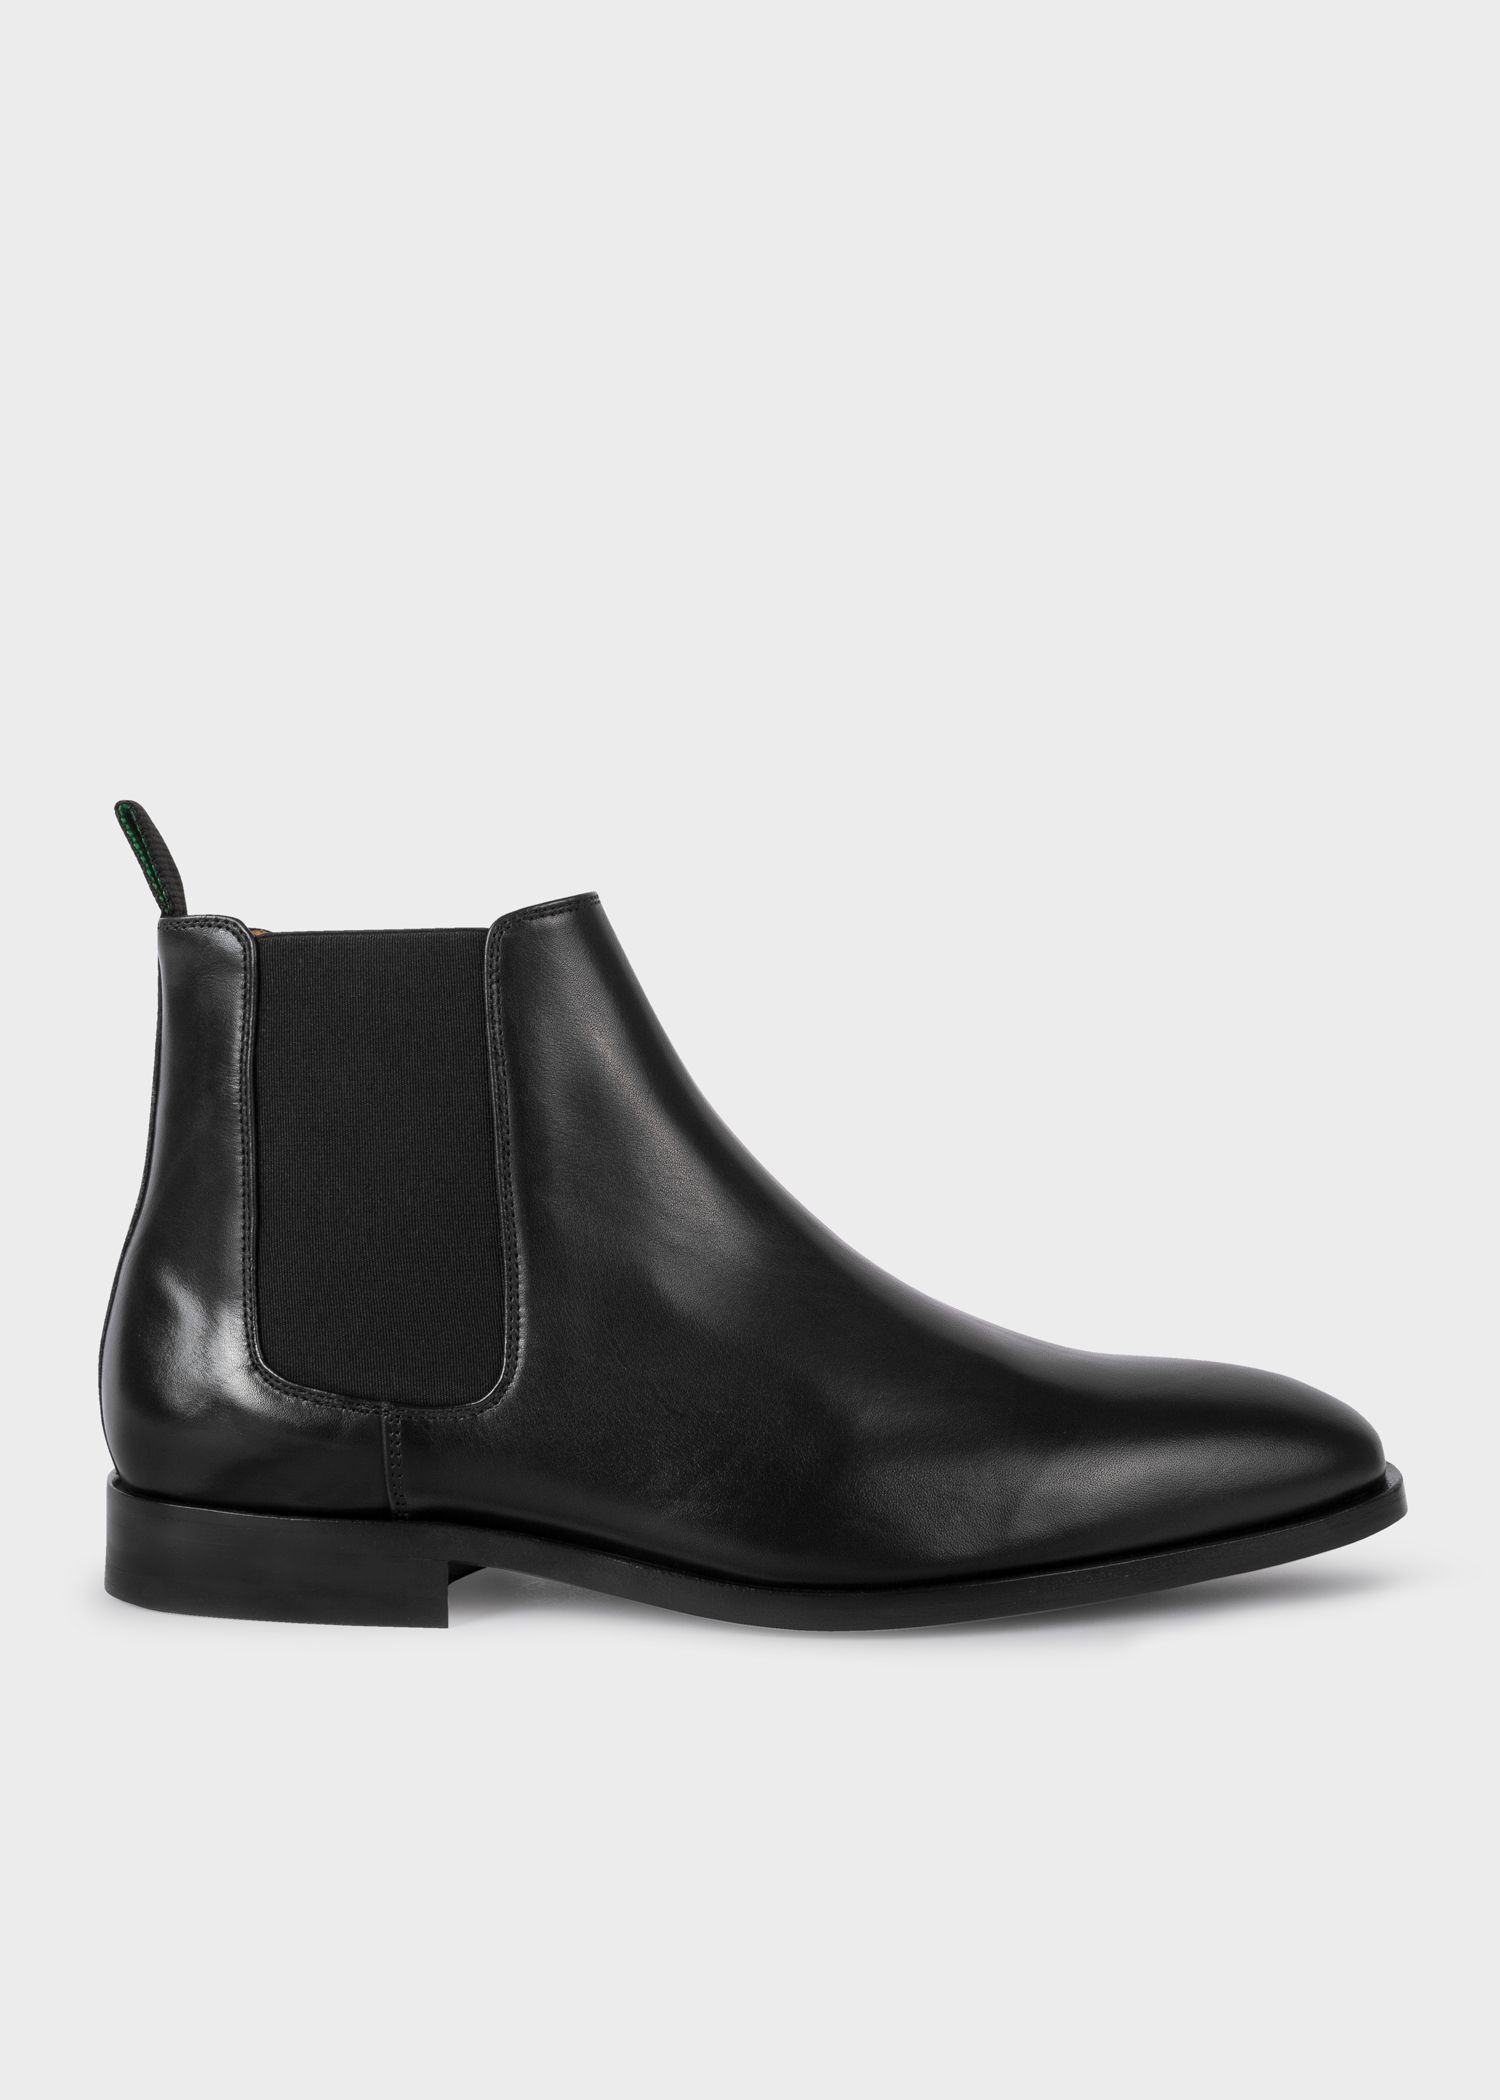 Men's Black Smooth Calf Leather 'Gerald' Chelsea - Smith US